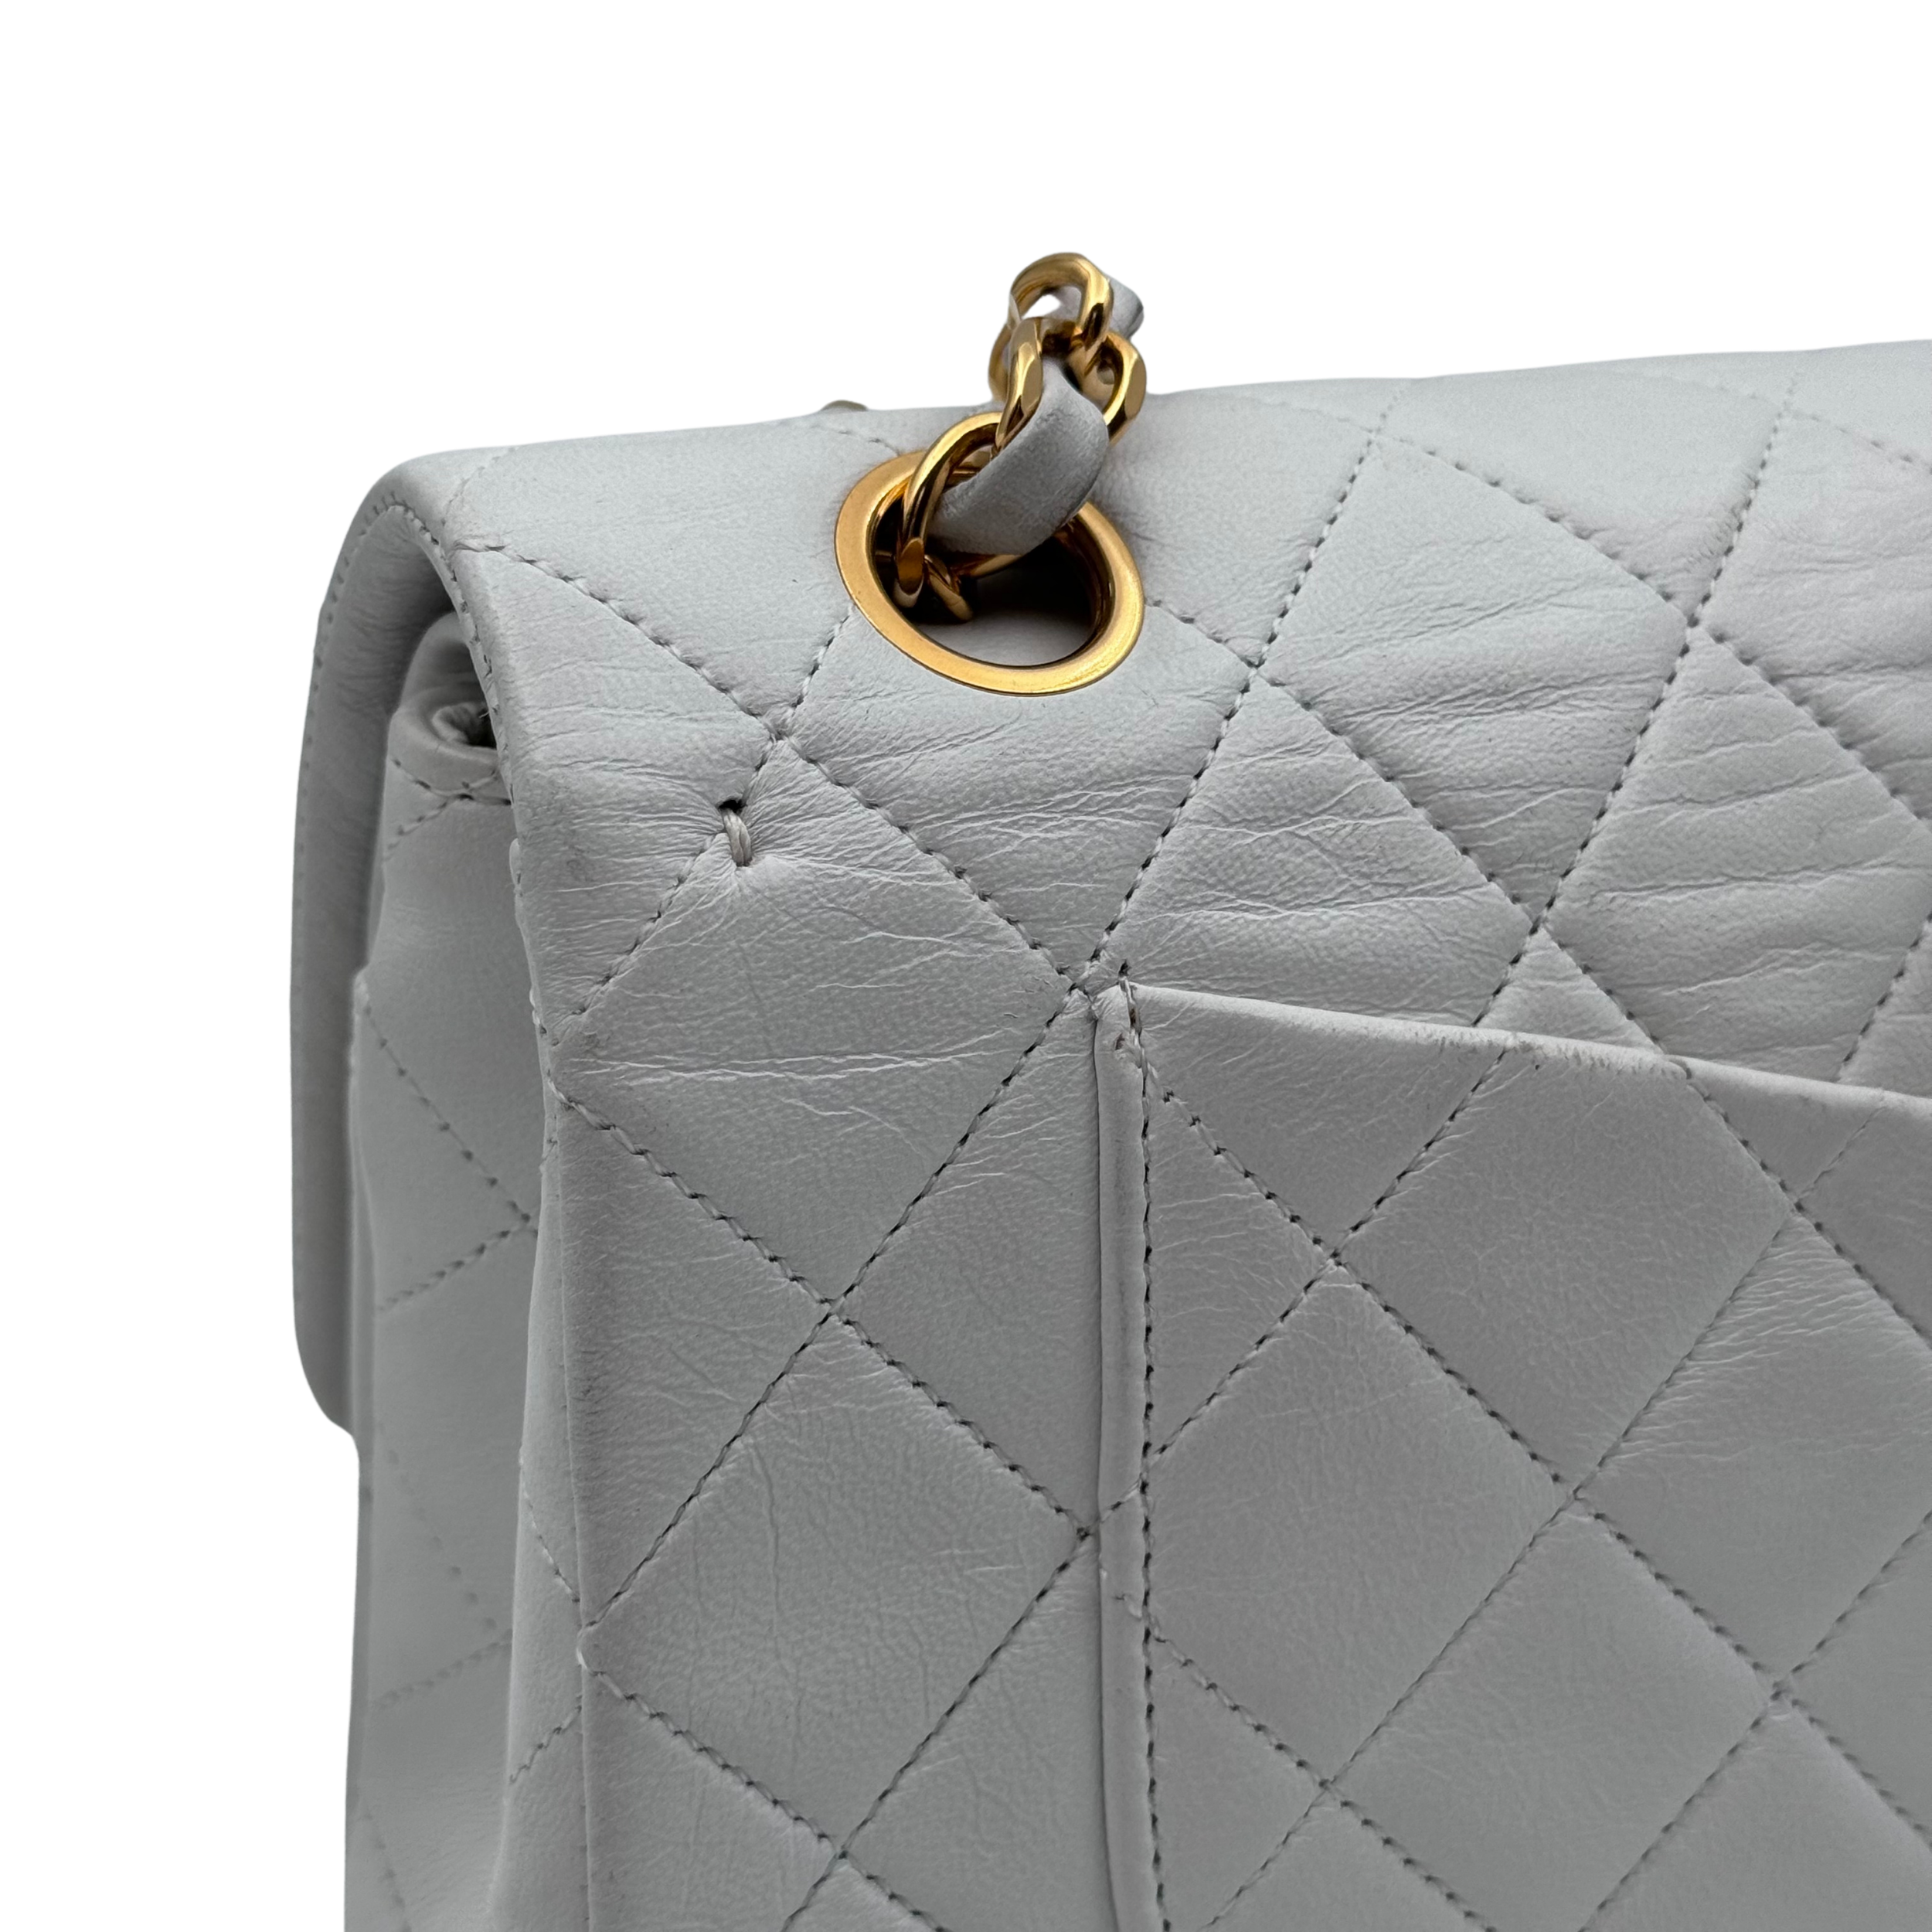 CLASSIC TIMELESS SMALL DOUBLE FLAP - CHANEL Lola Collective